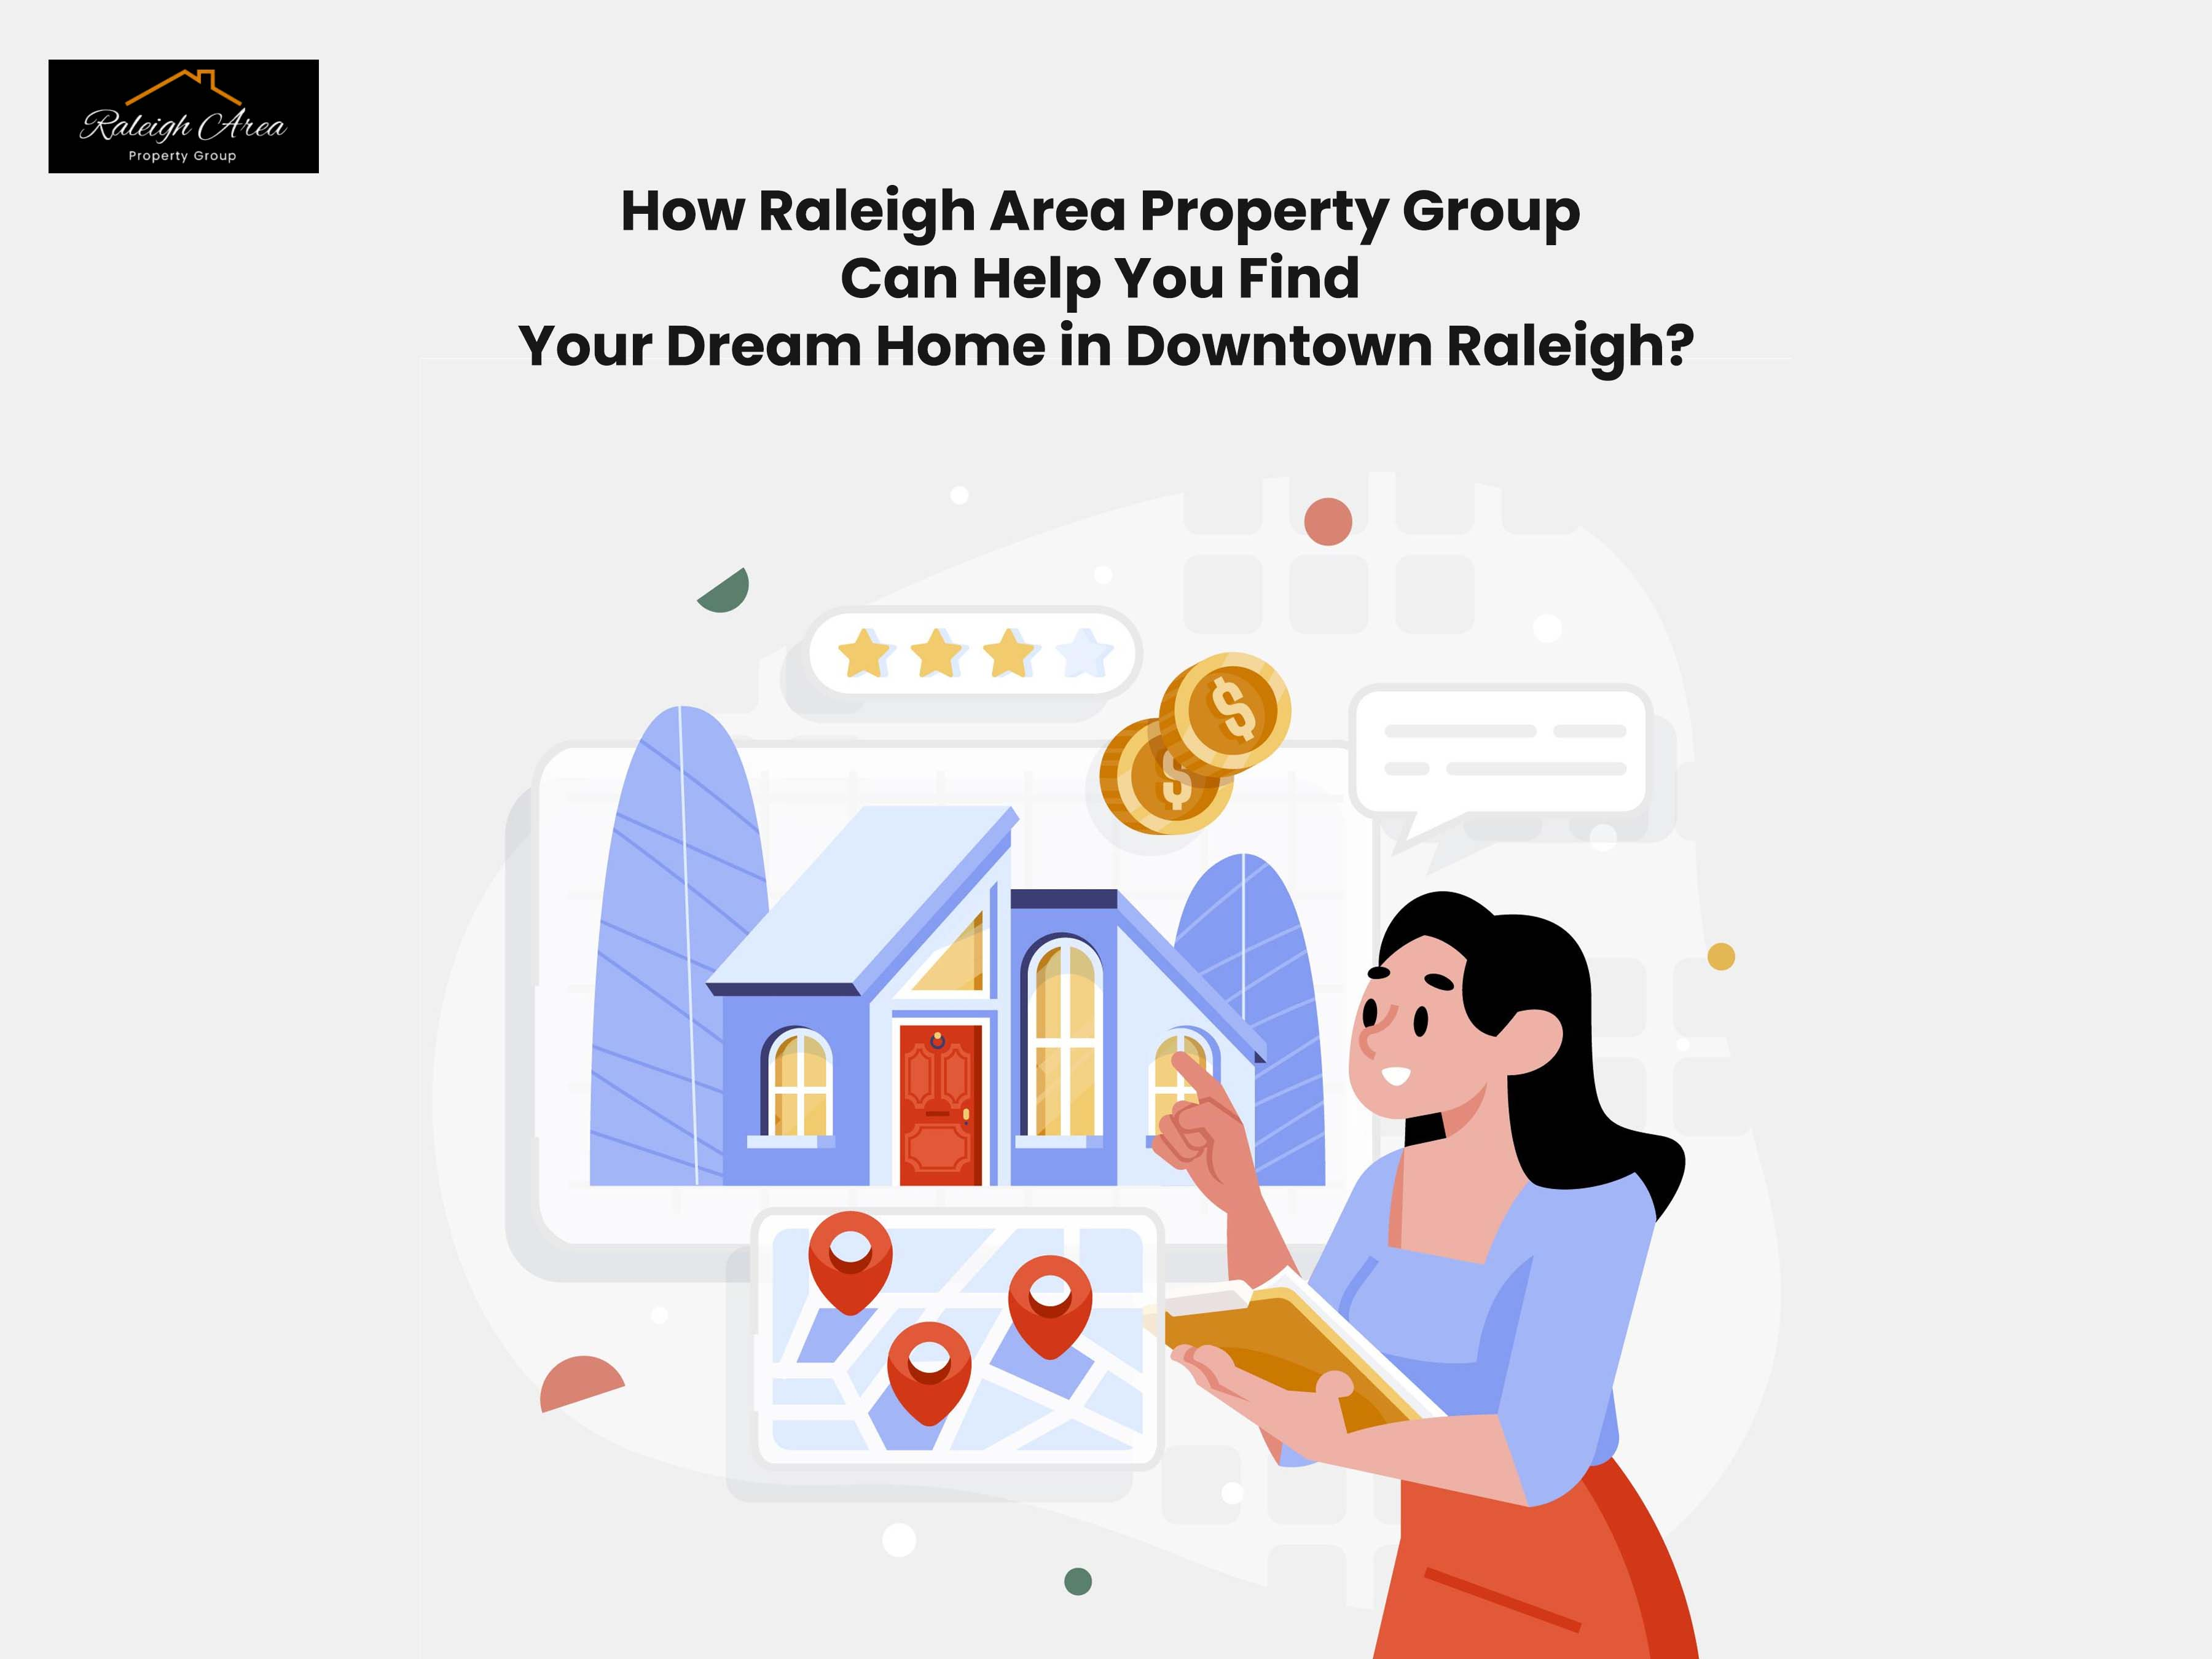 How Raleigh Area Property Group Can Help You Find Your Dream Home in Downtown Raleigh